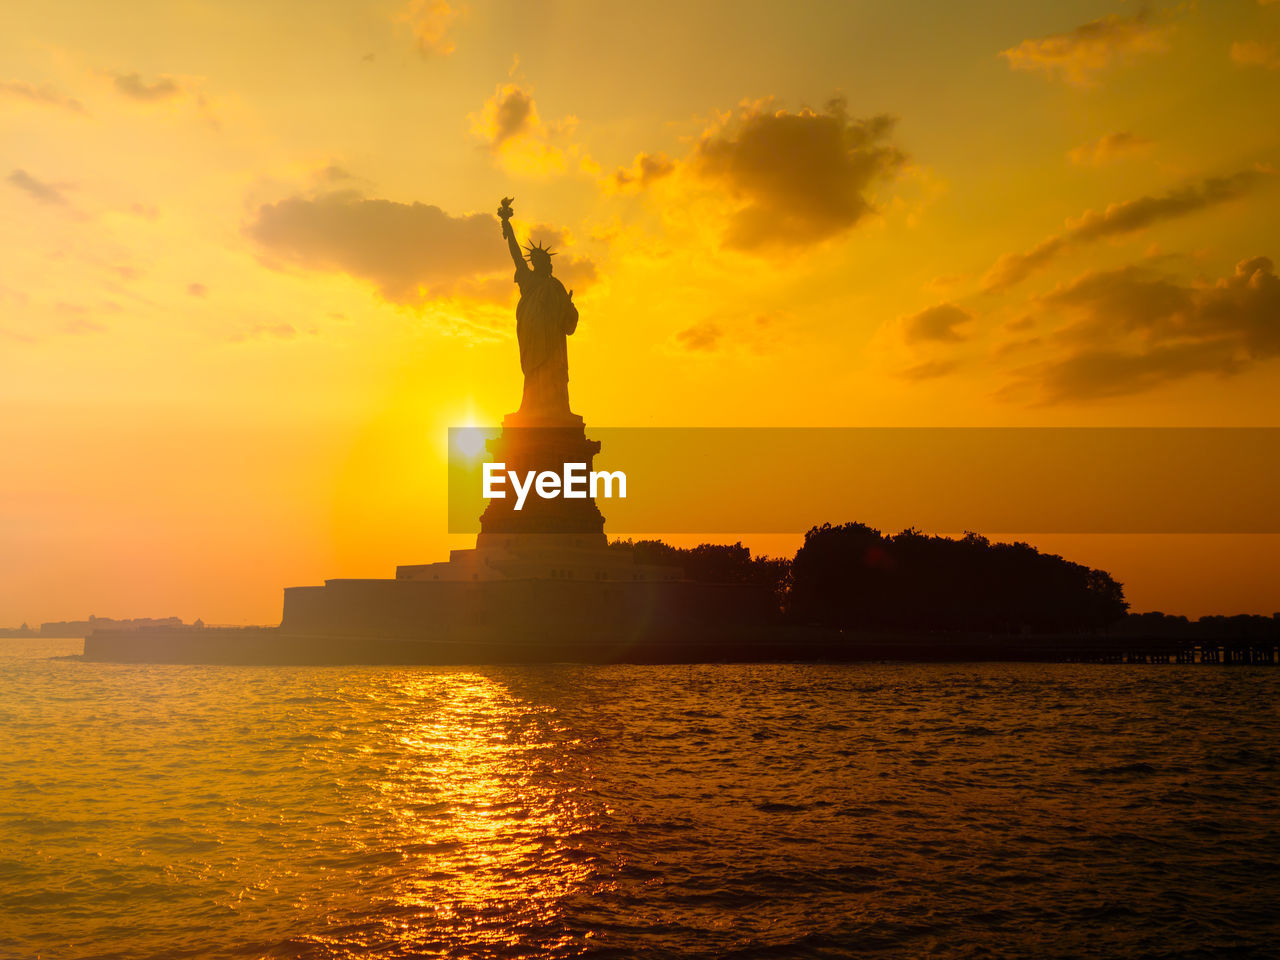 Statue of liberty at sunset